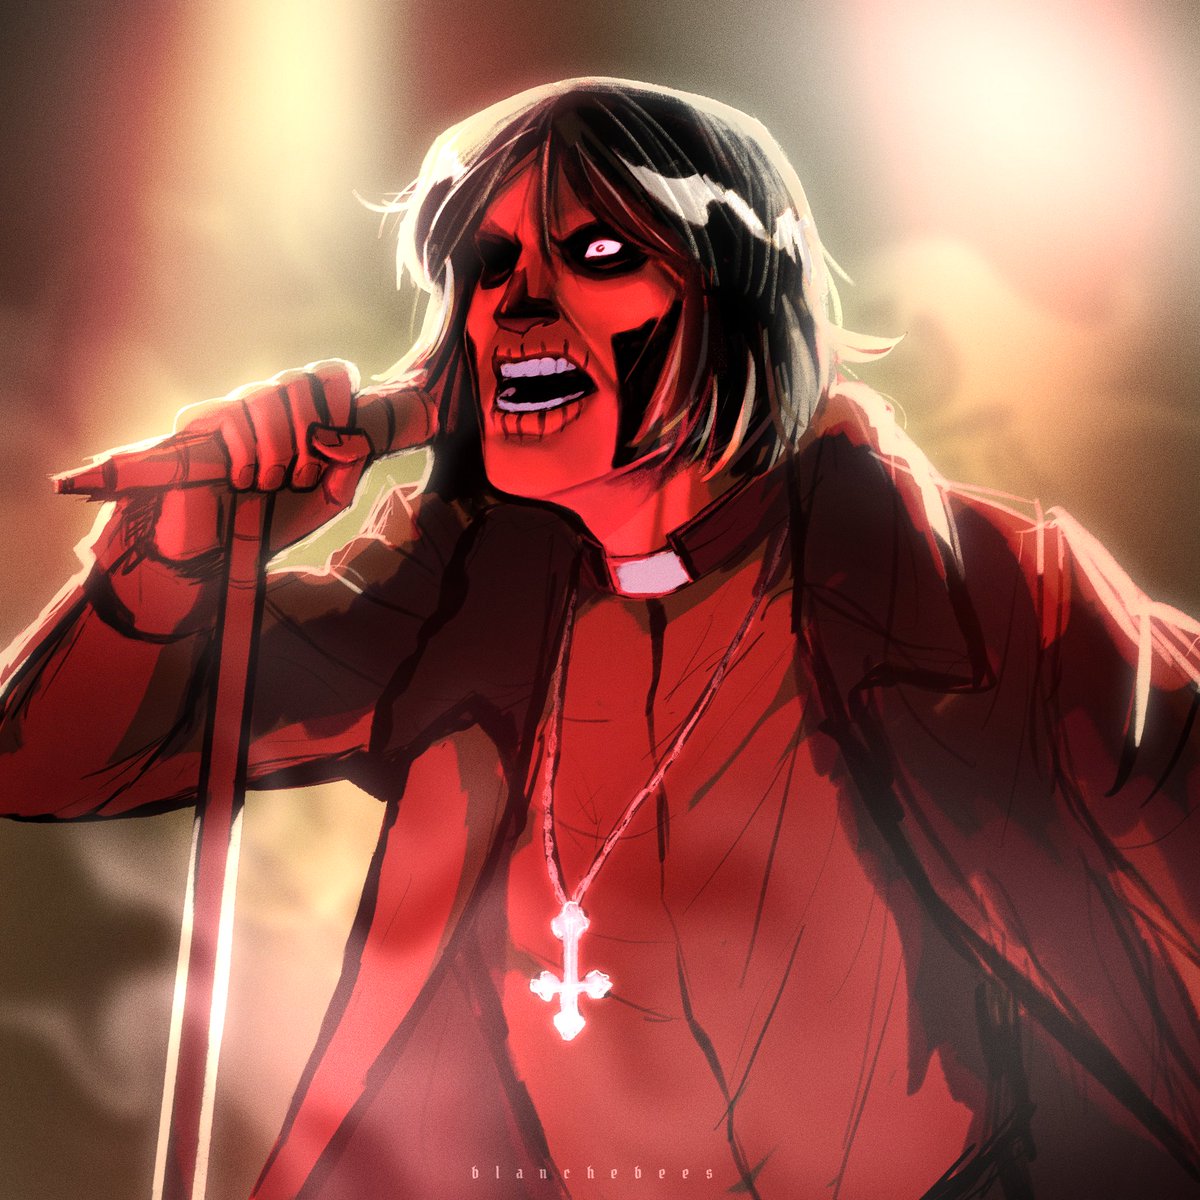 A wild Nihil appears
#papanihil #thebandghost